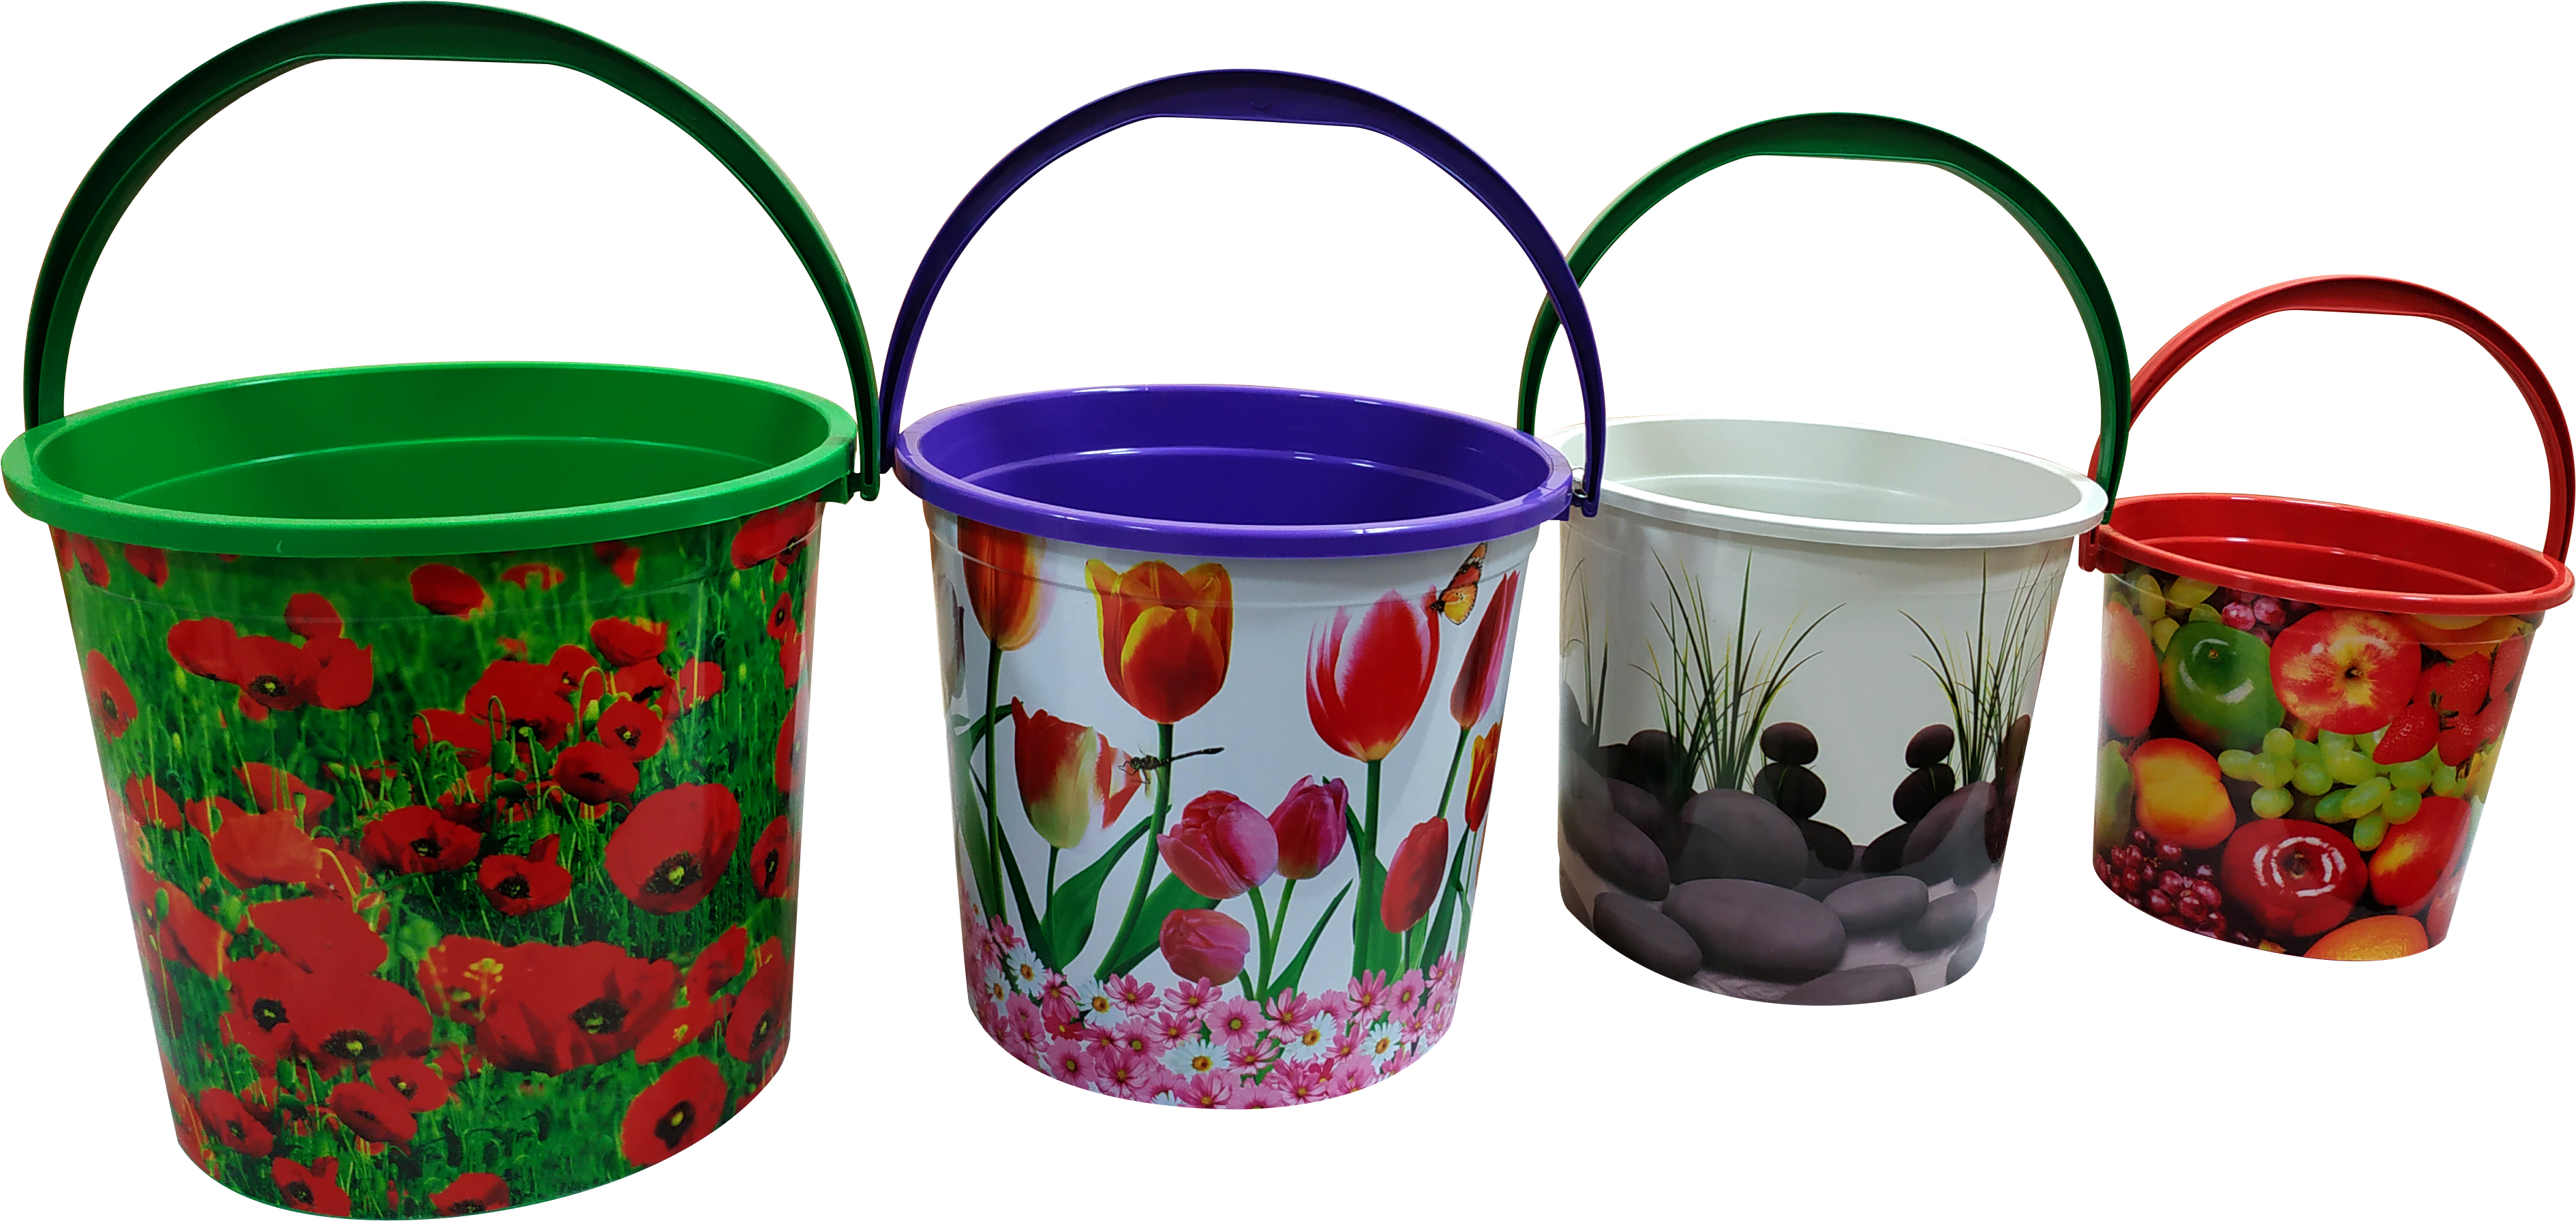 A Group Of Buckets With Floral Designs